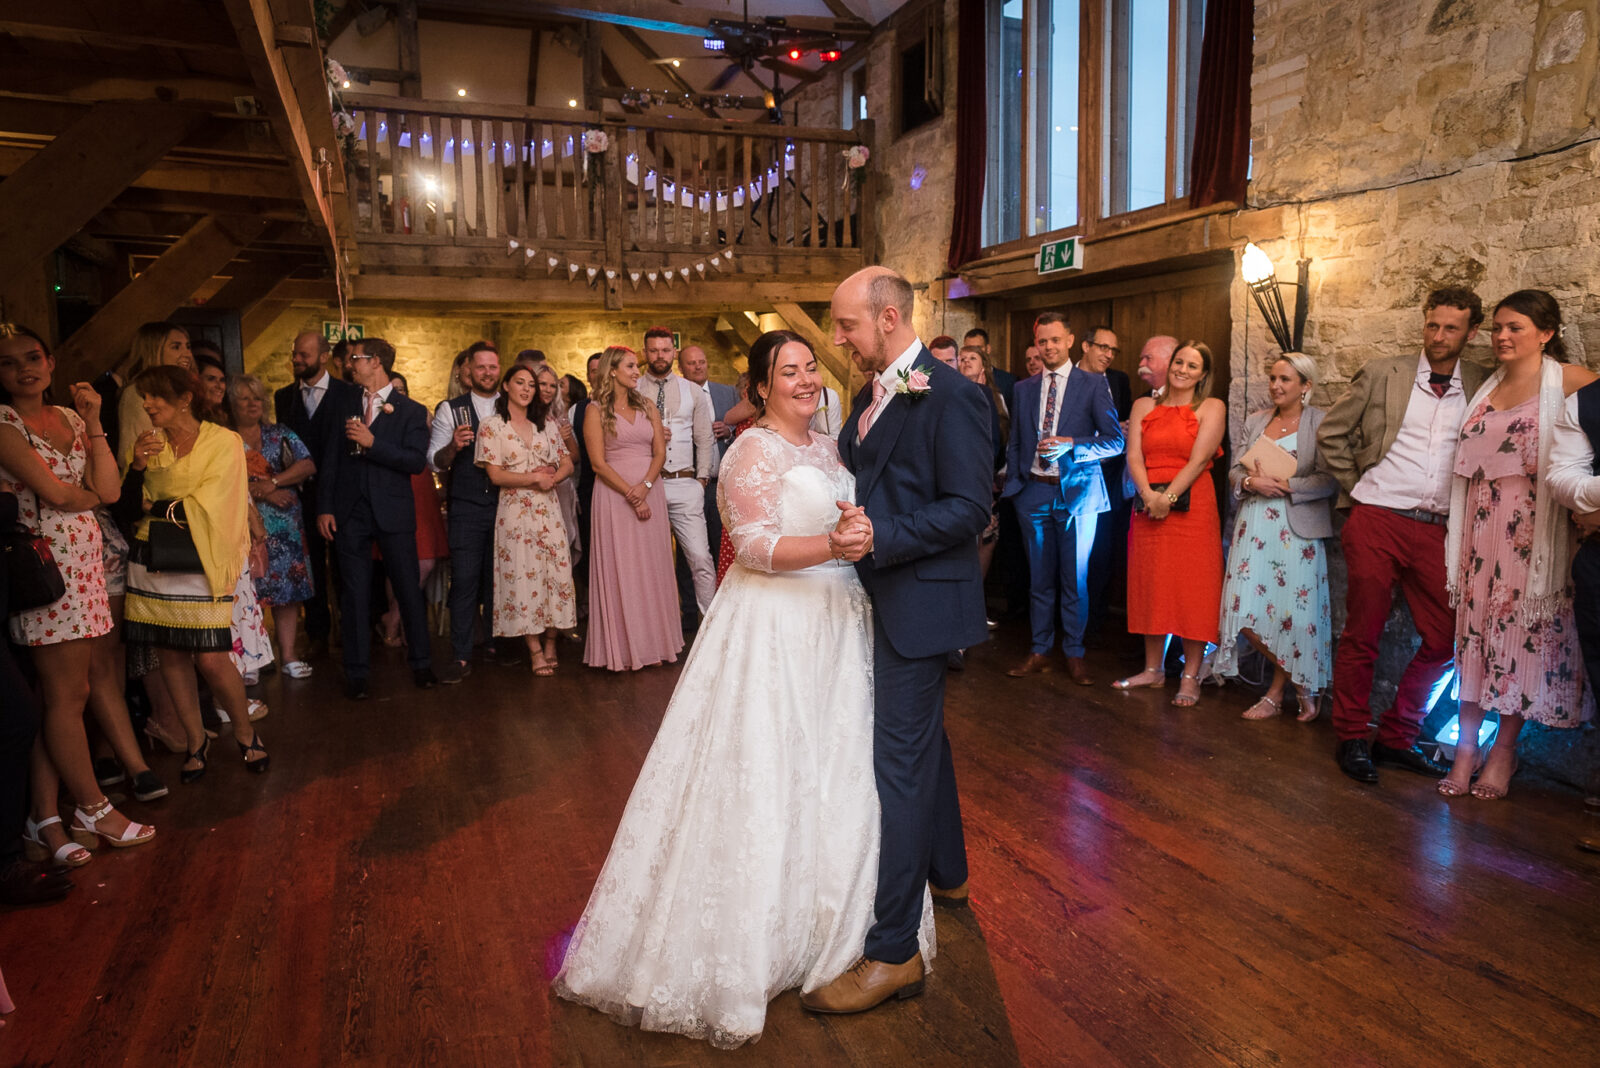 Bride and groom's first dance at Swallows Oast wedding venue, Ticehurst, East Sussex | Oakhouse Photography